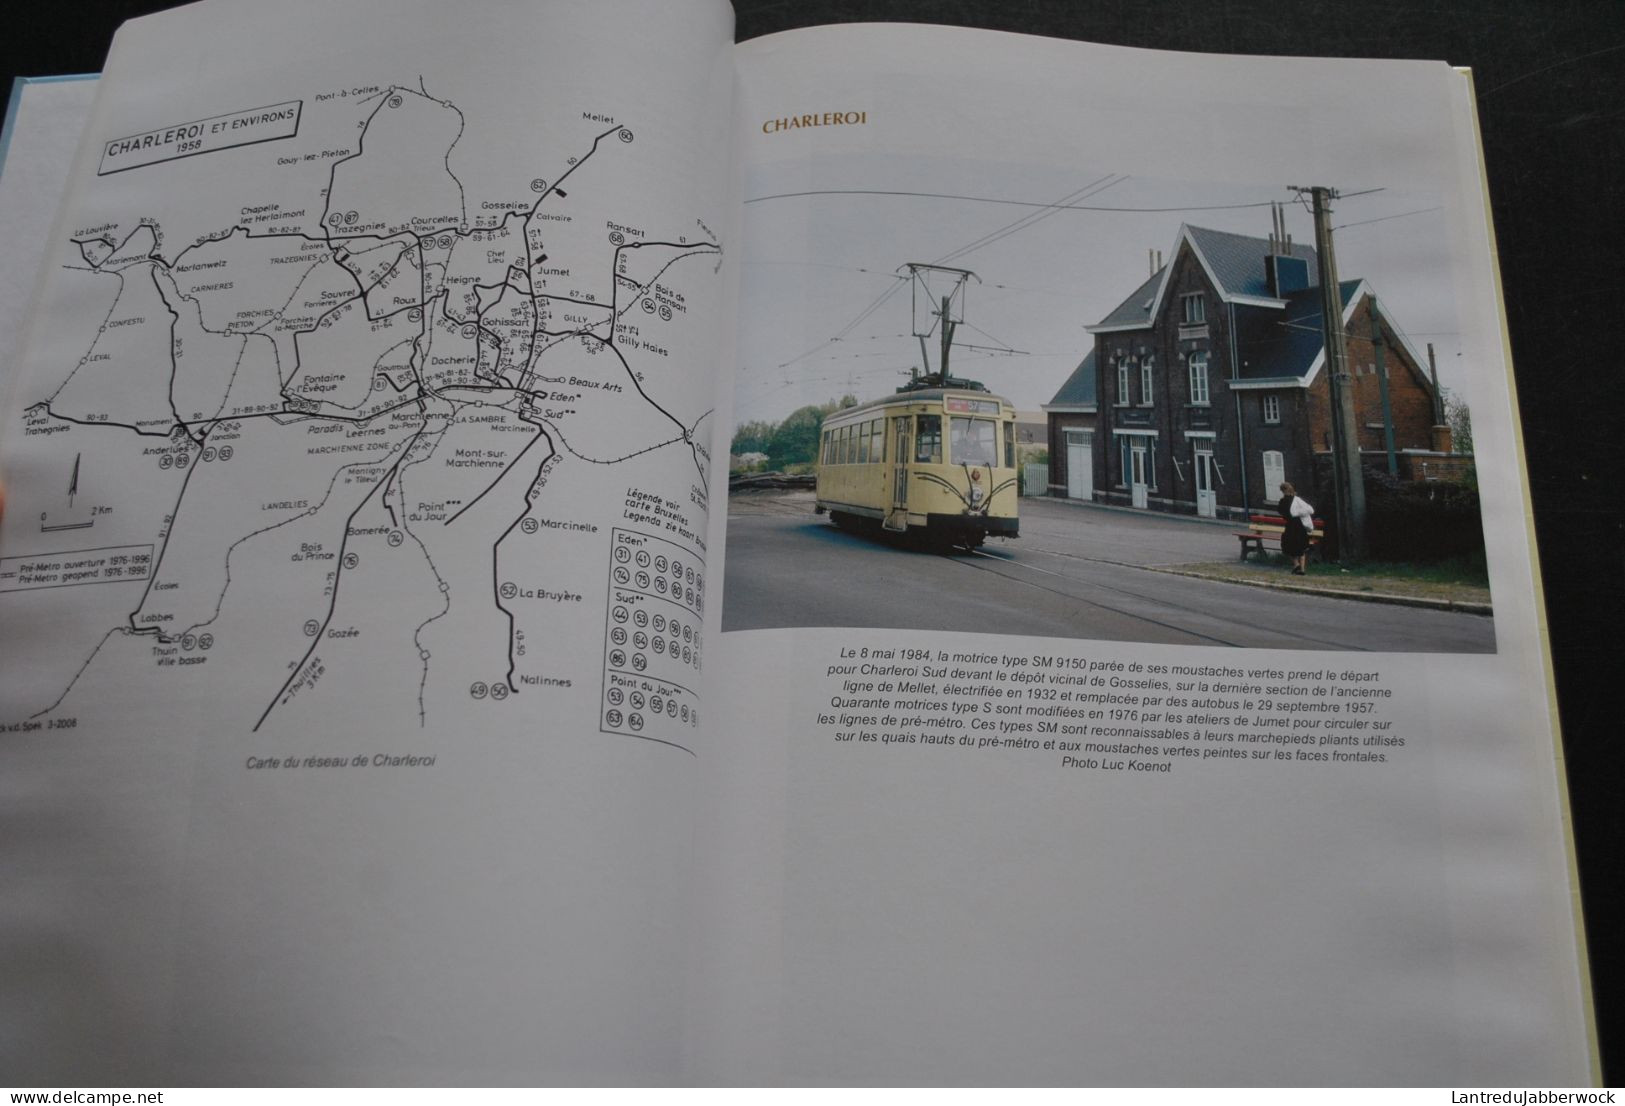 Couleurs vicinales Editions du Cabri Collection Images ferroviaires NMVB SNCV trams tramways Motrice Standard Type S N